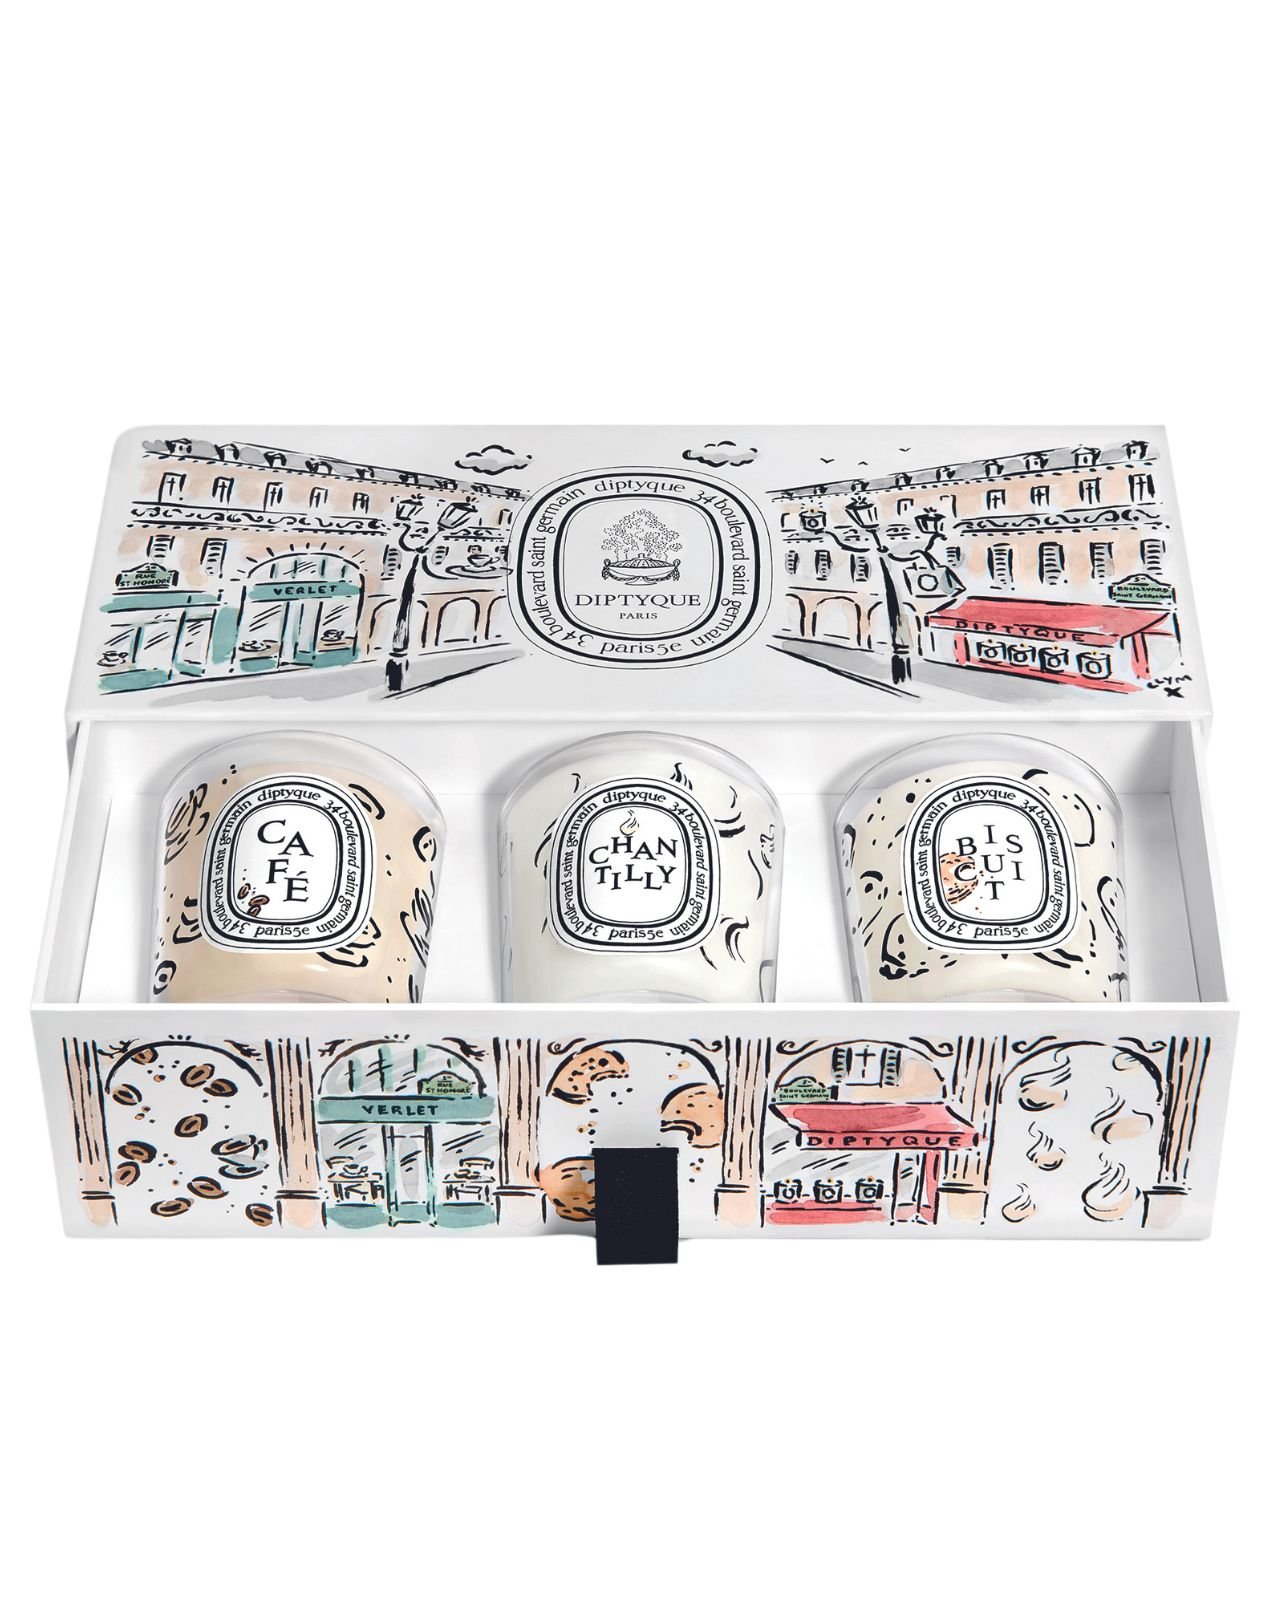 Diptyque’s set of 3 candles from the Café Verlet collection